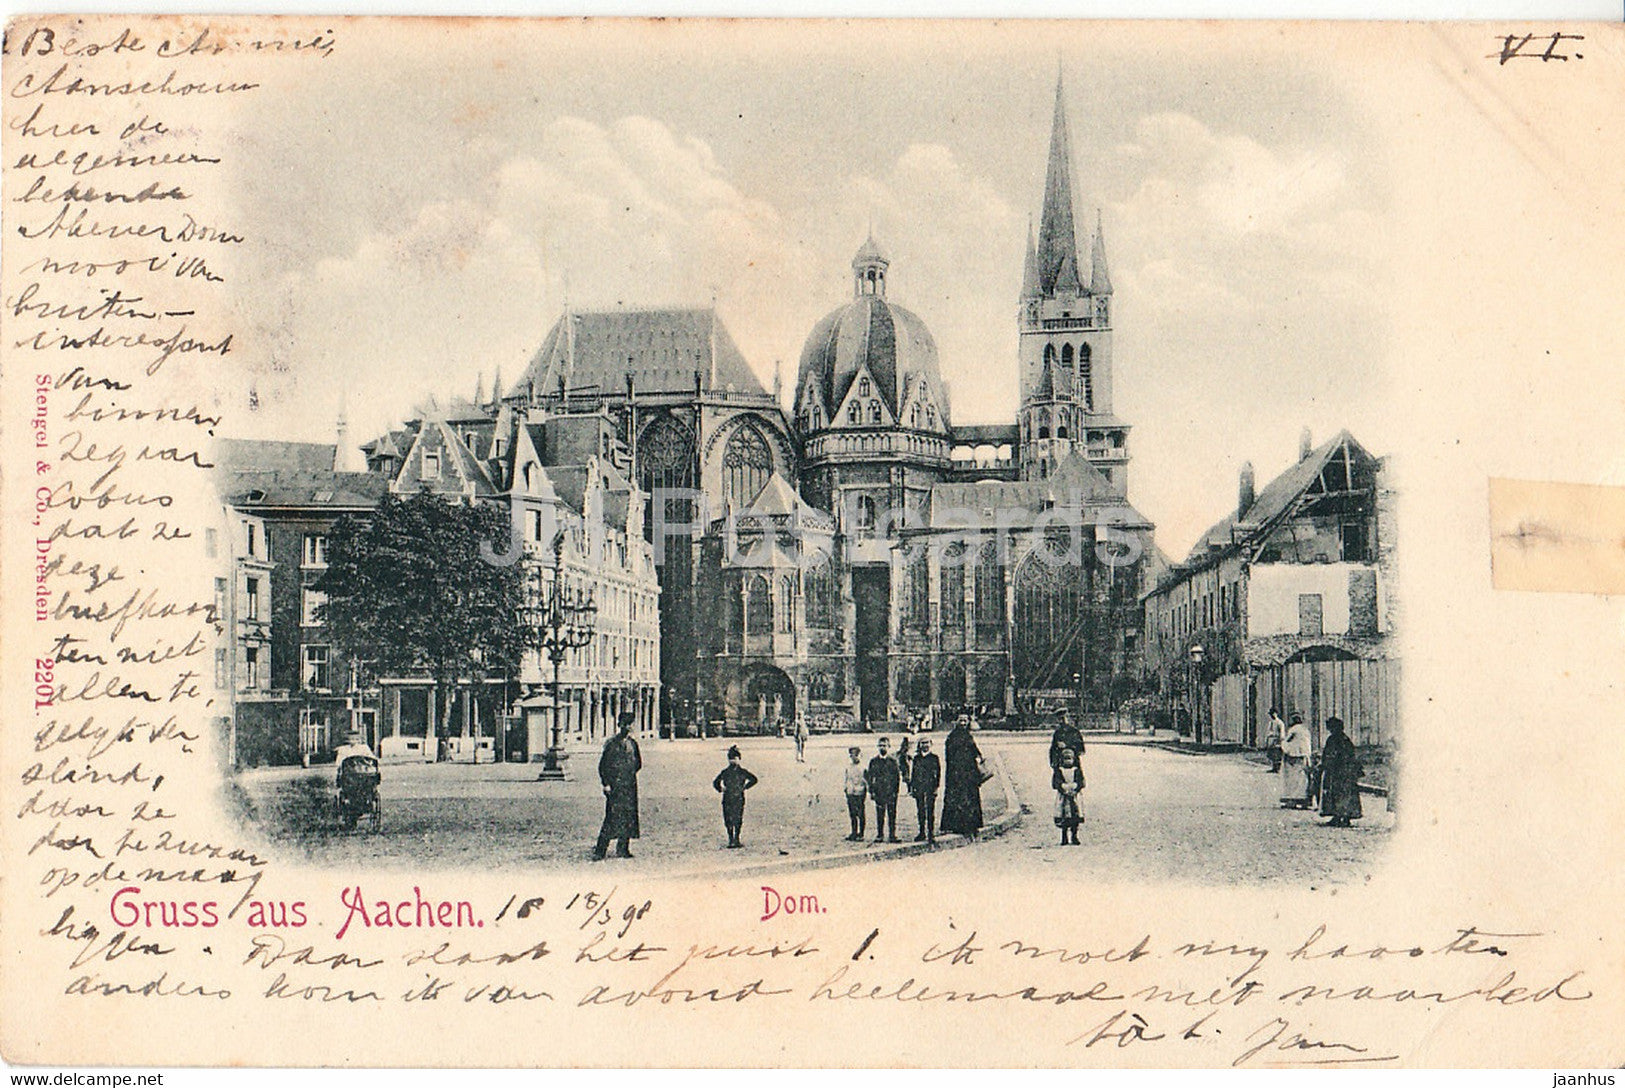 Gruss aus Aachen - Dom - Cathedral - old postcard - 1898 - Germany - used - JH Postcards